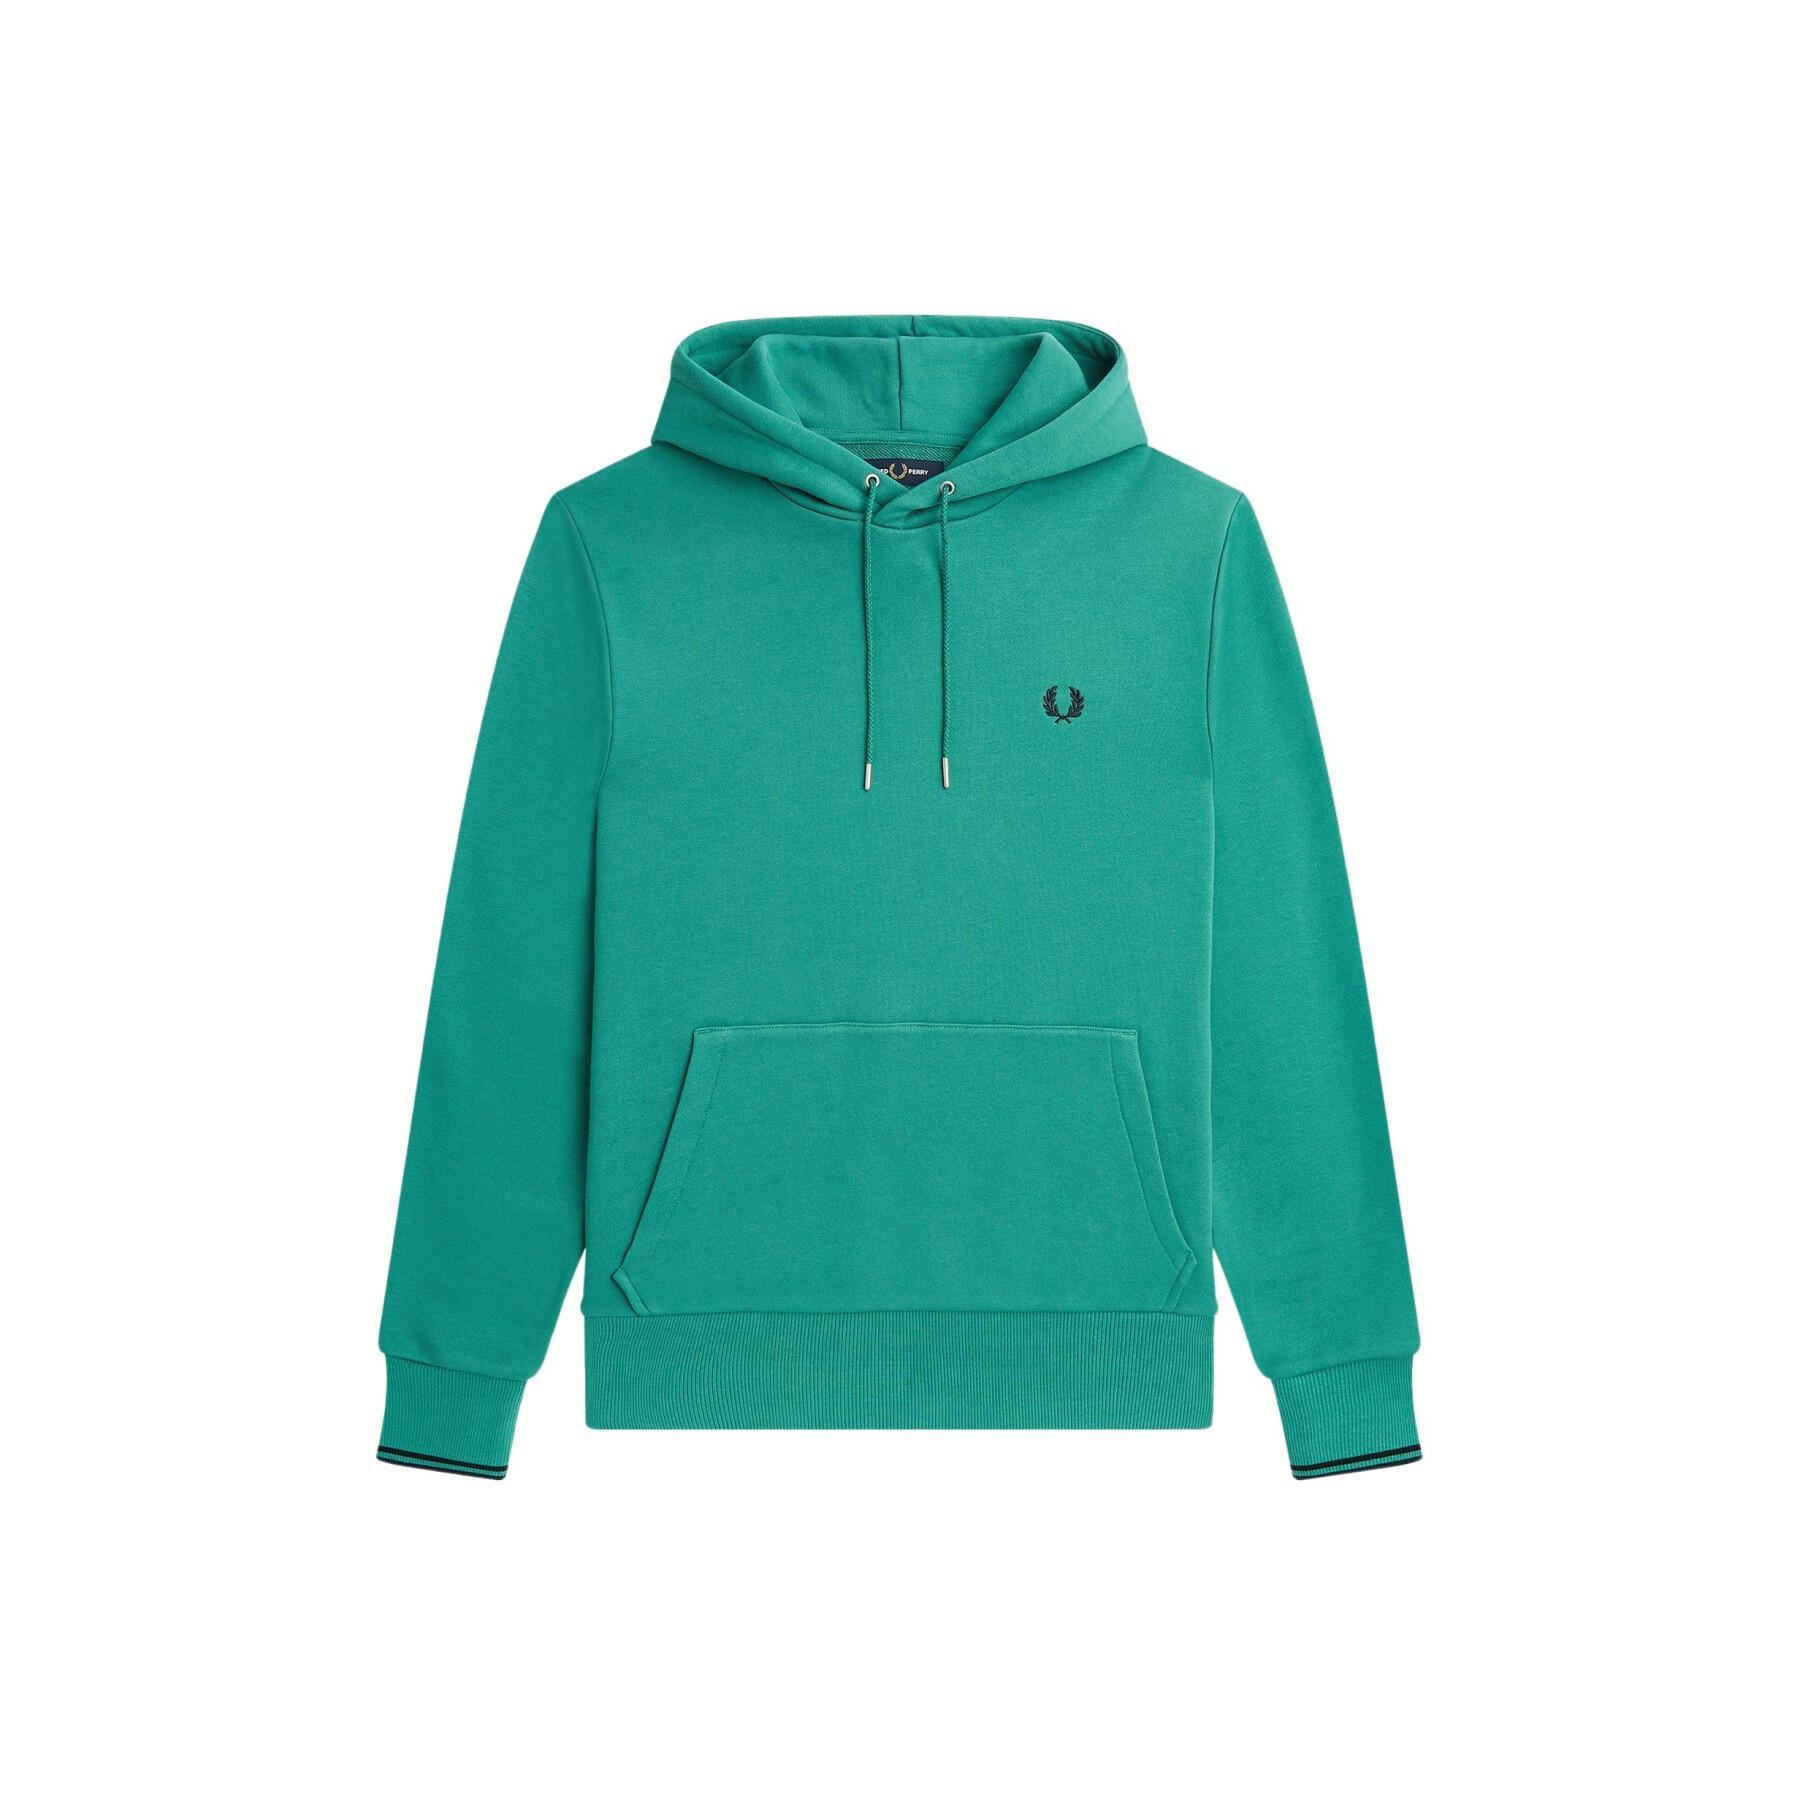 Hooded sweatshirt with piping Fred Perry